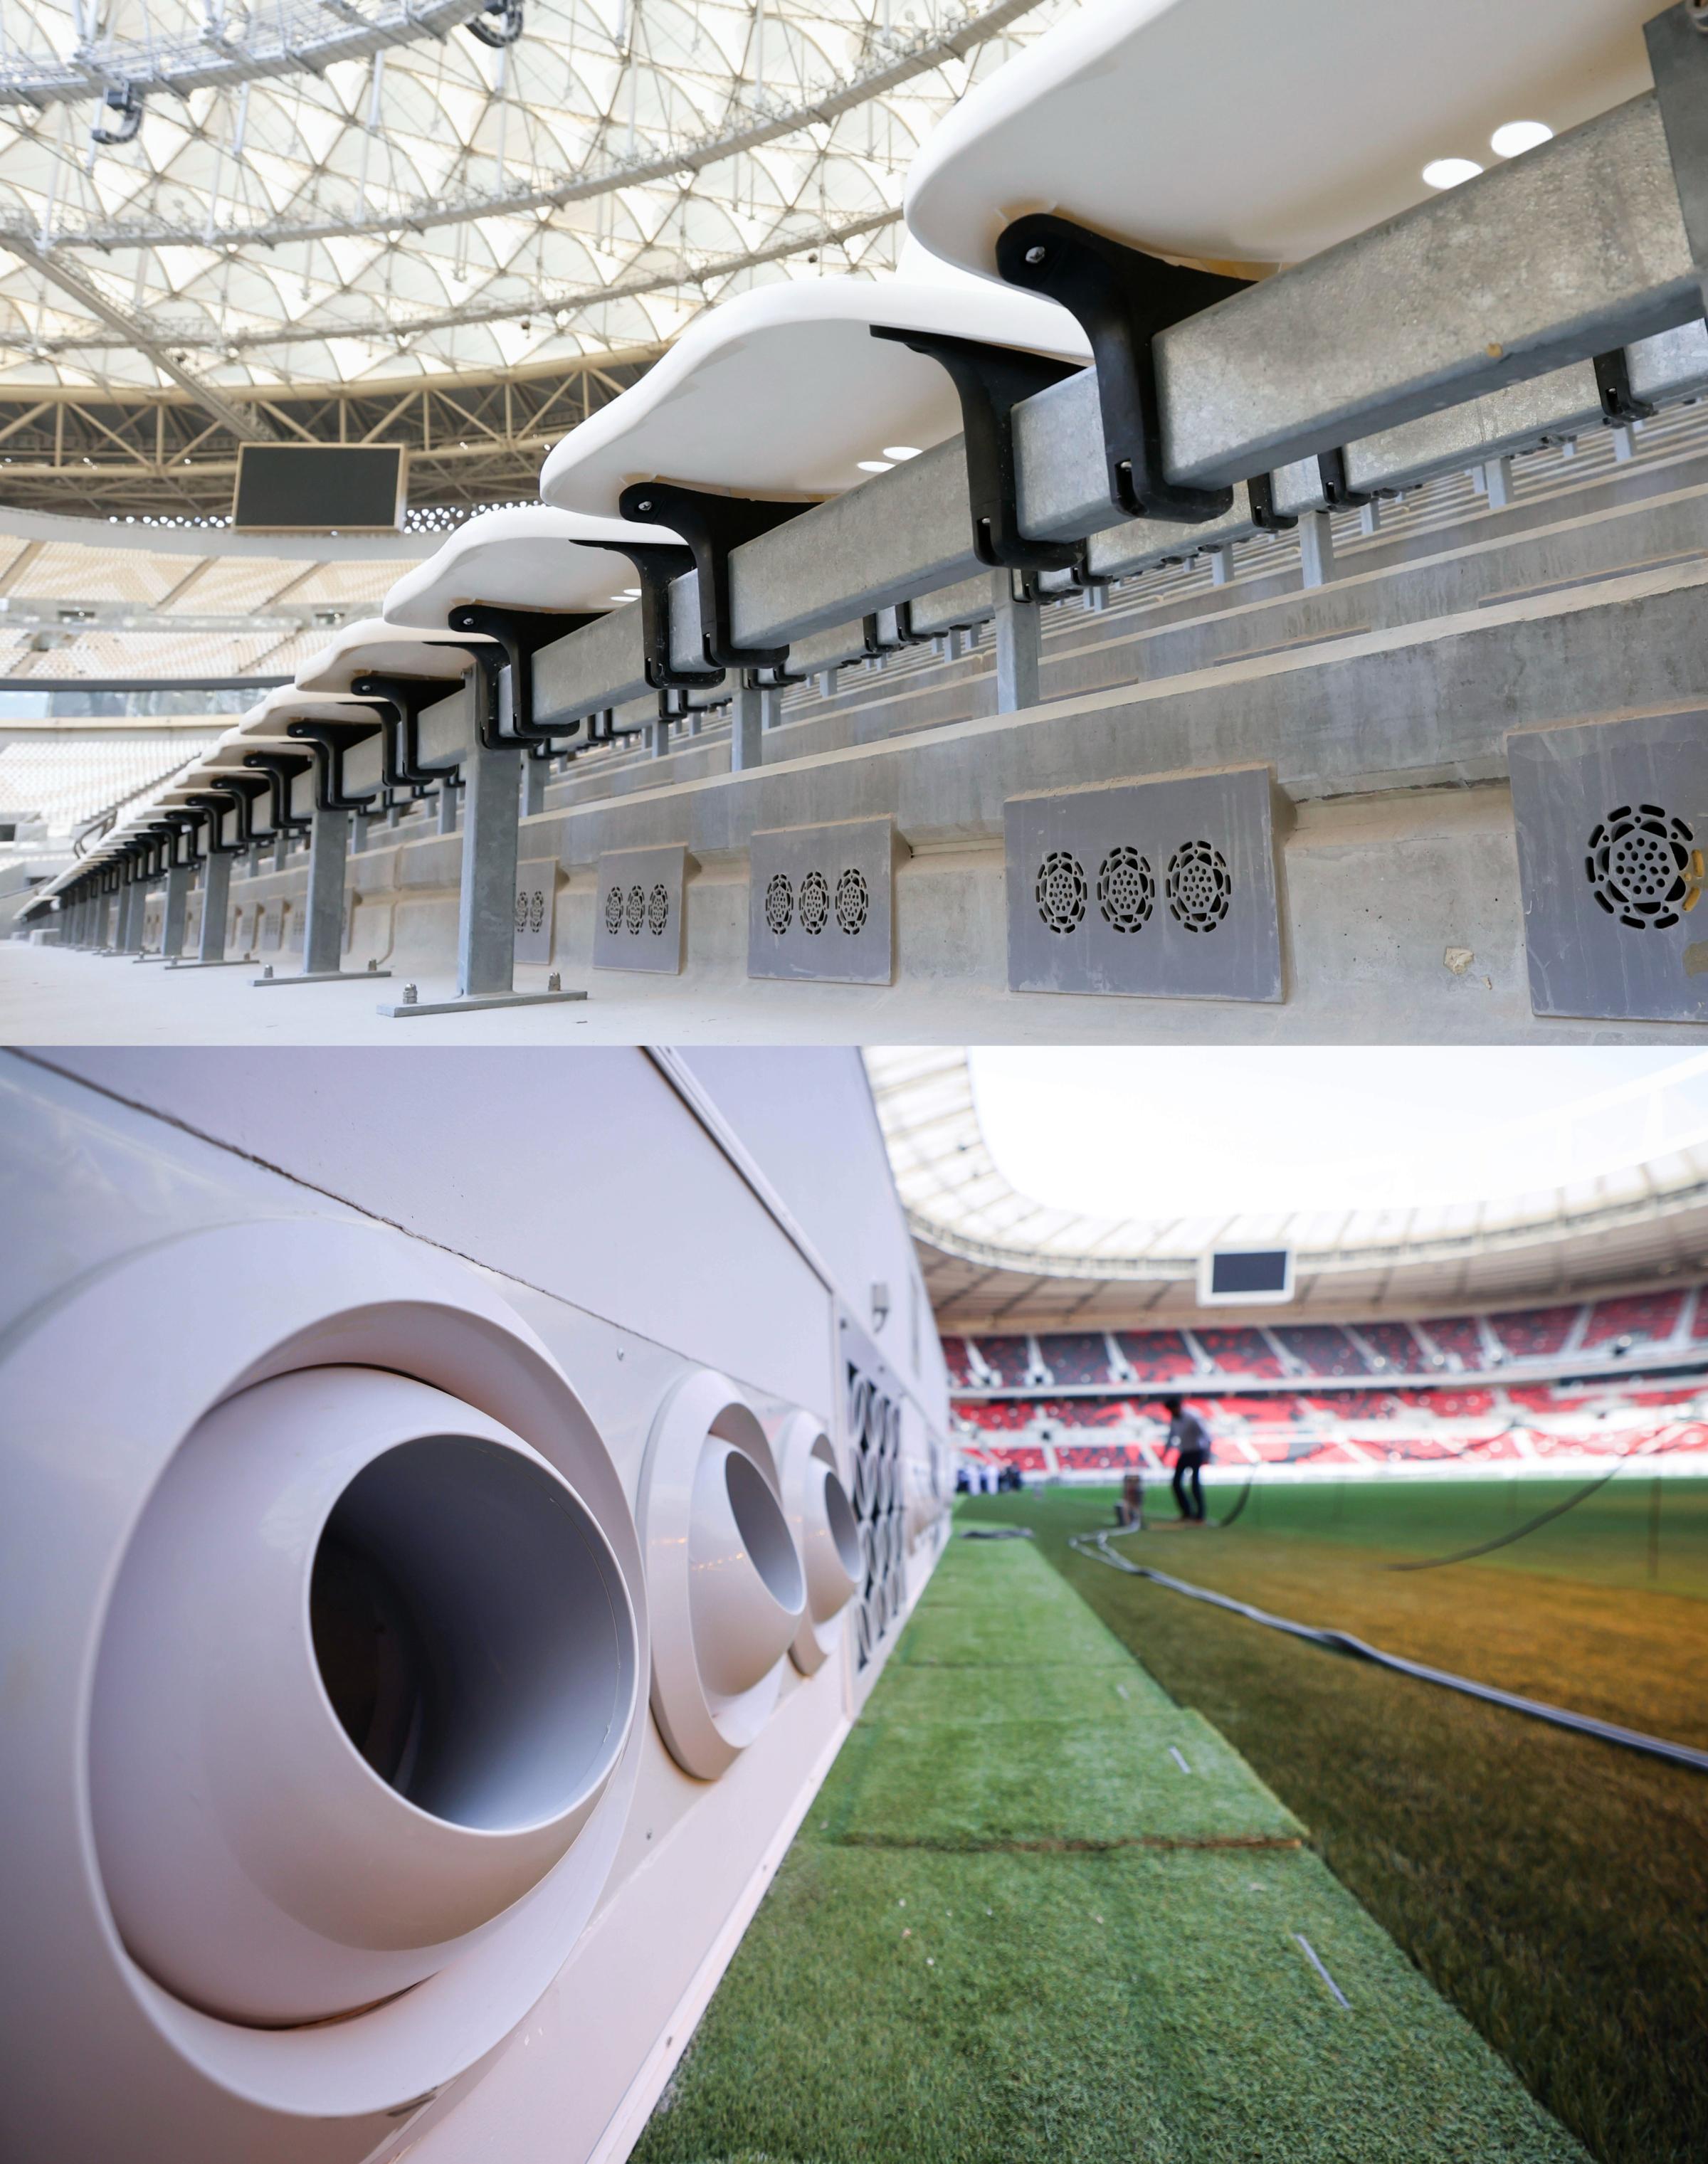 Photos taken earlier this year show (top) air conditioning vents at Lusail Stadium, the venue of the 2022 World Cup Final, and (bottom) pitch-side nozzles, which are used to blow cooled air into the arena, at Ahmad Bin Ali Stadium in Qatar.